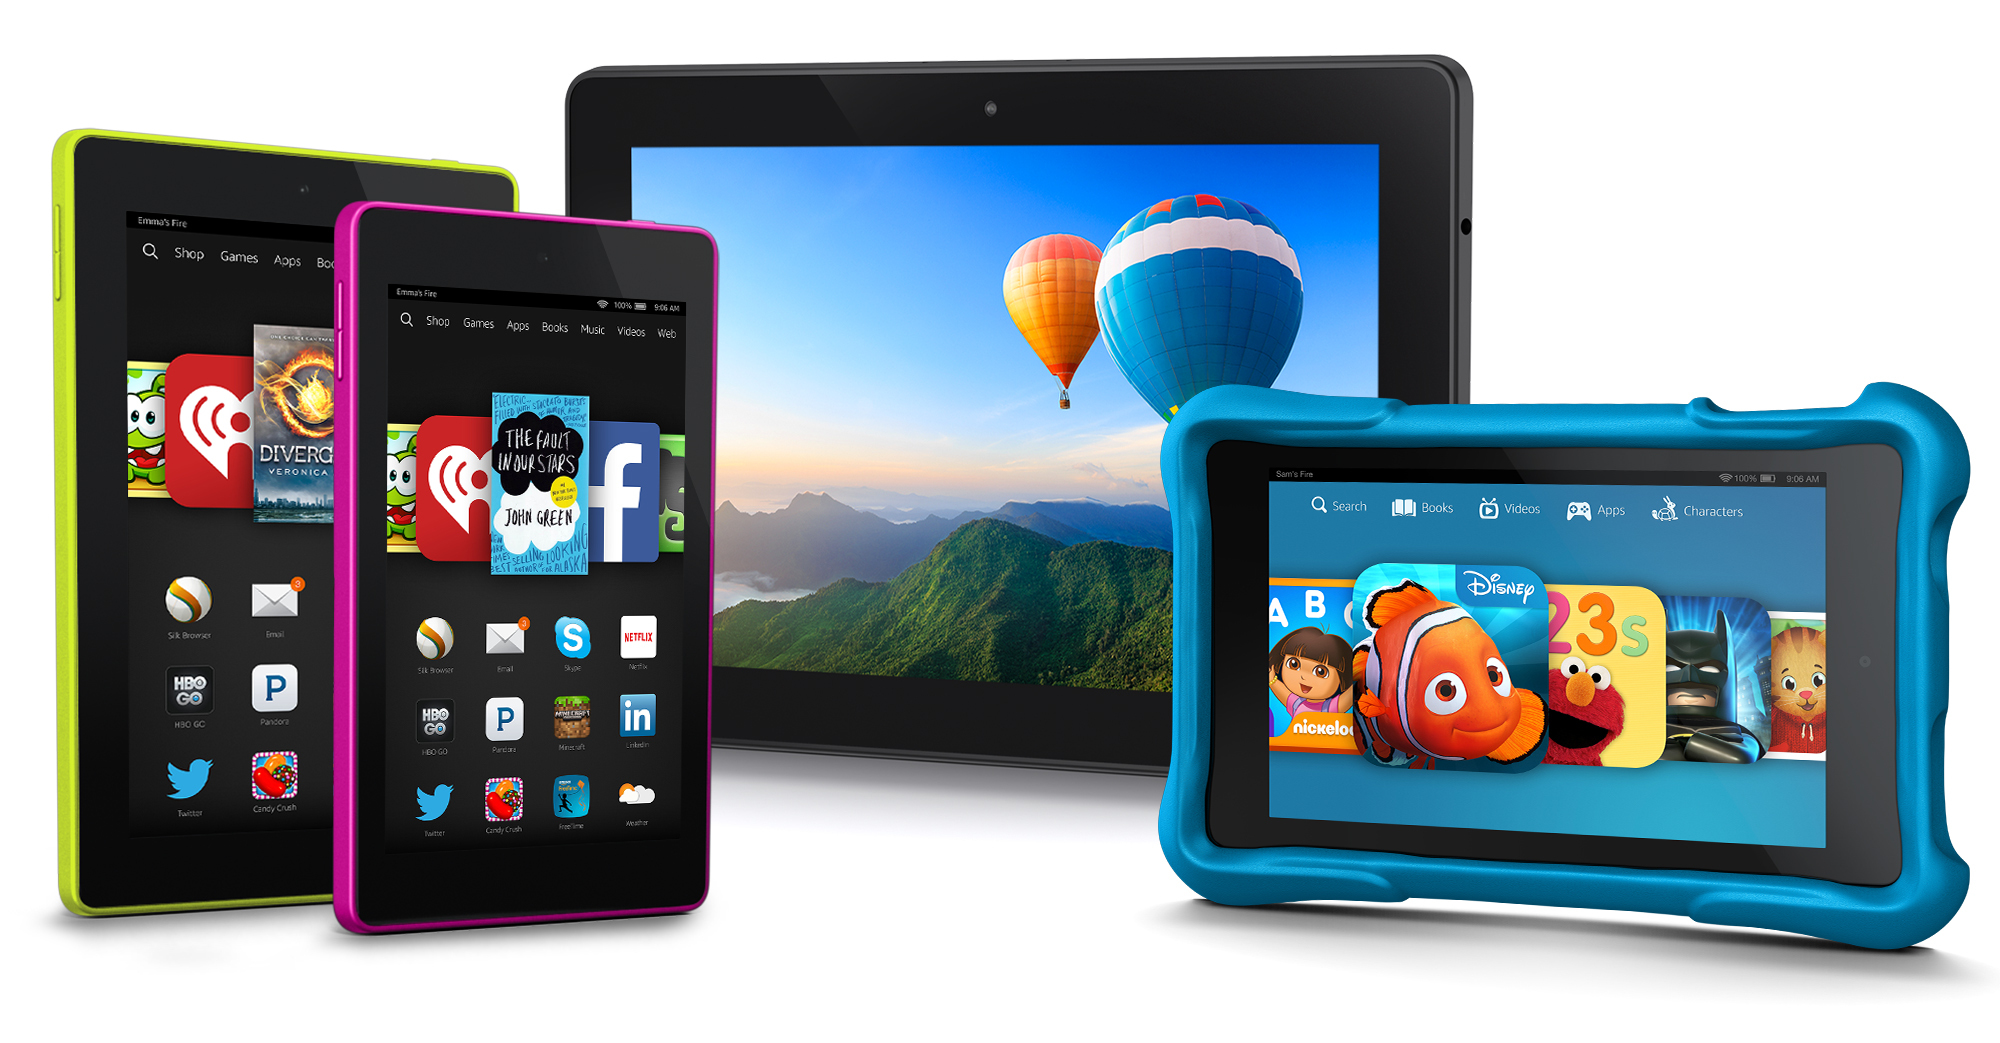 Amazon Launches Kid-friendly Kindle Fire Tablet